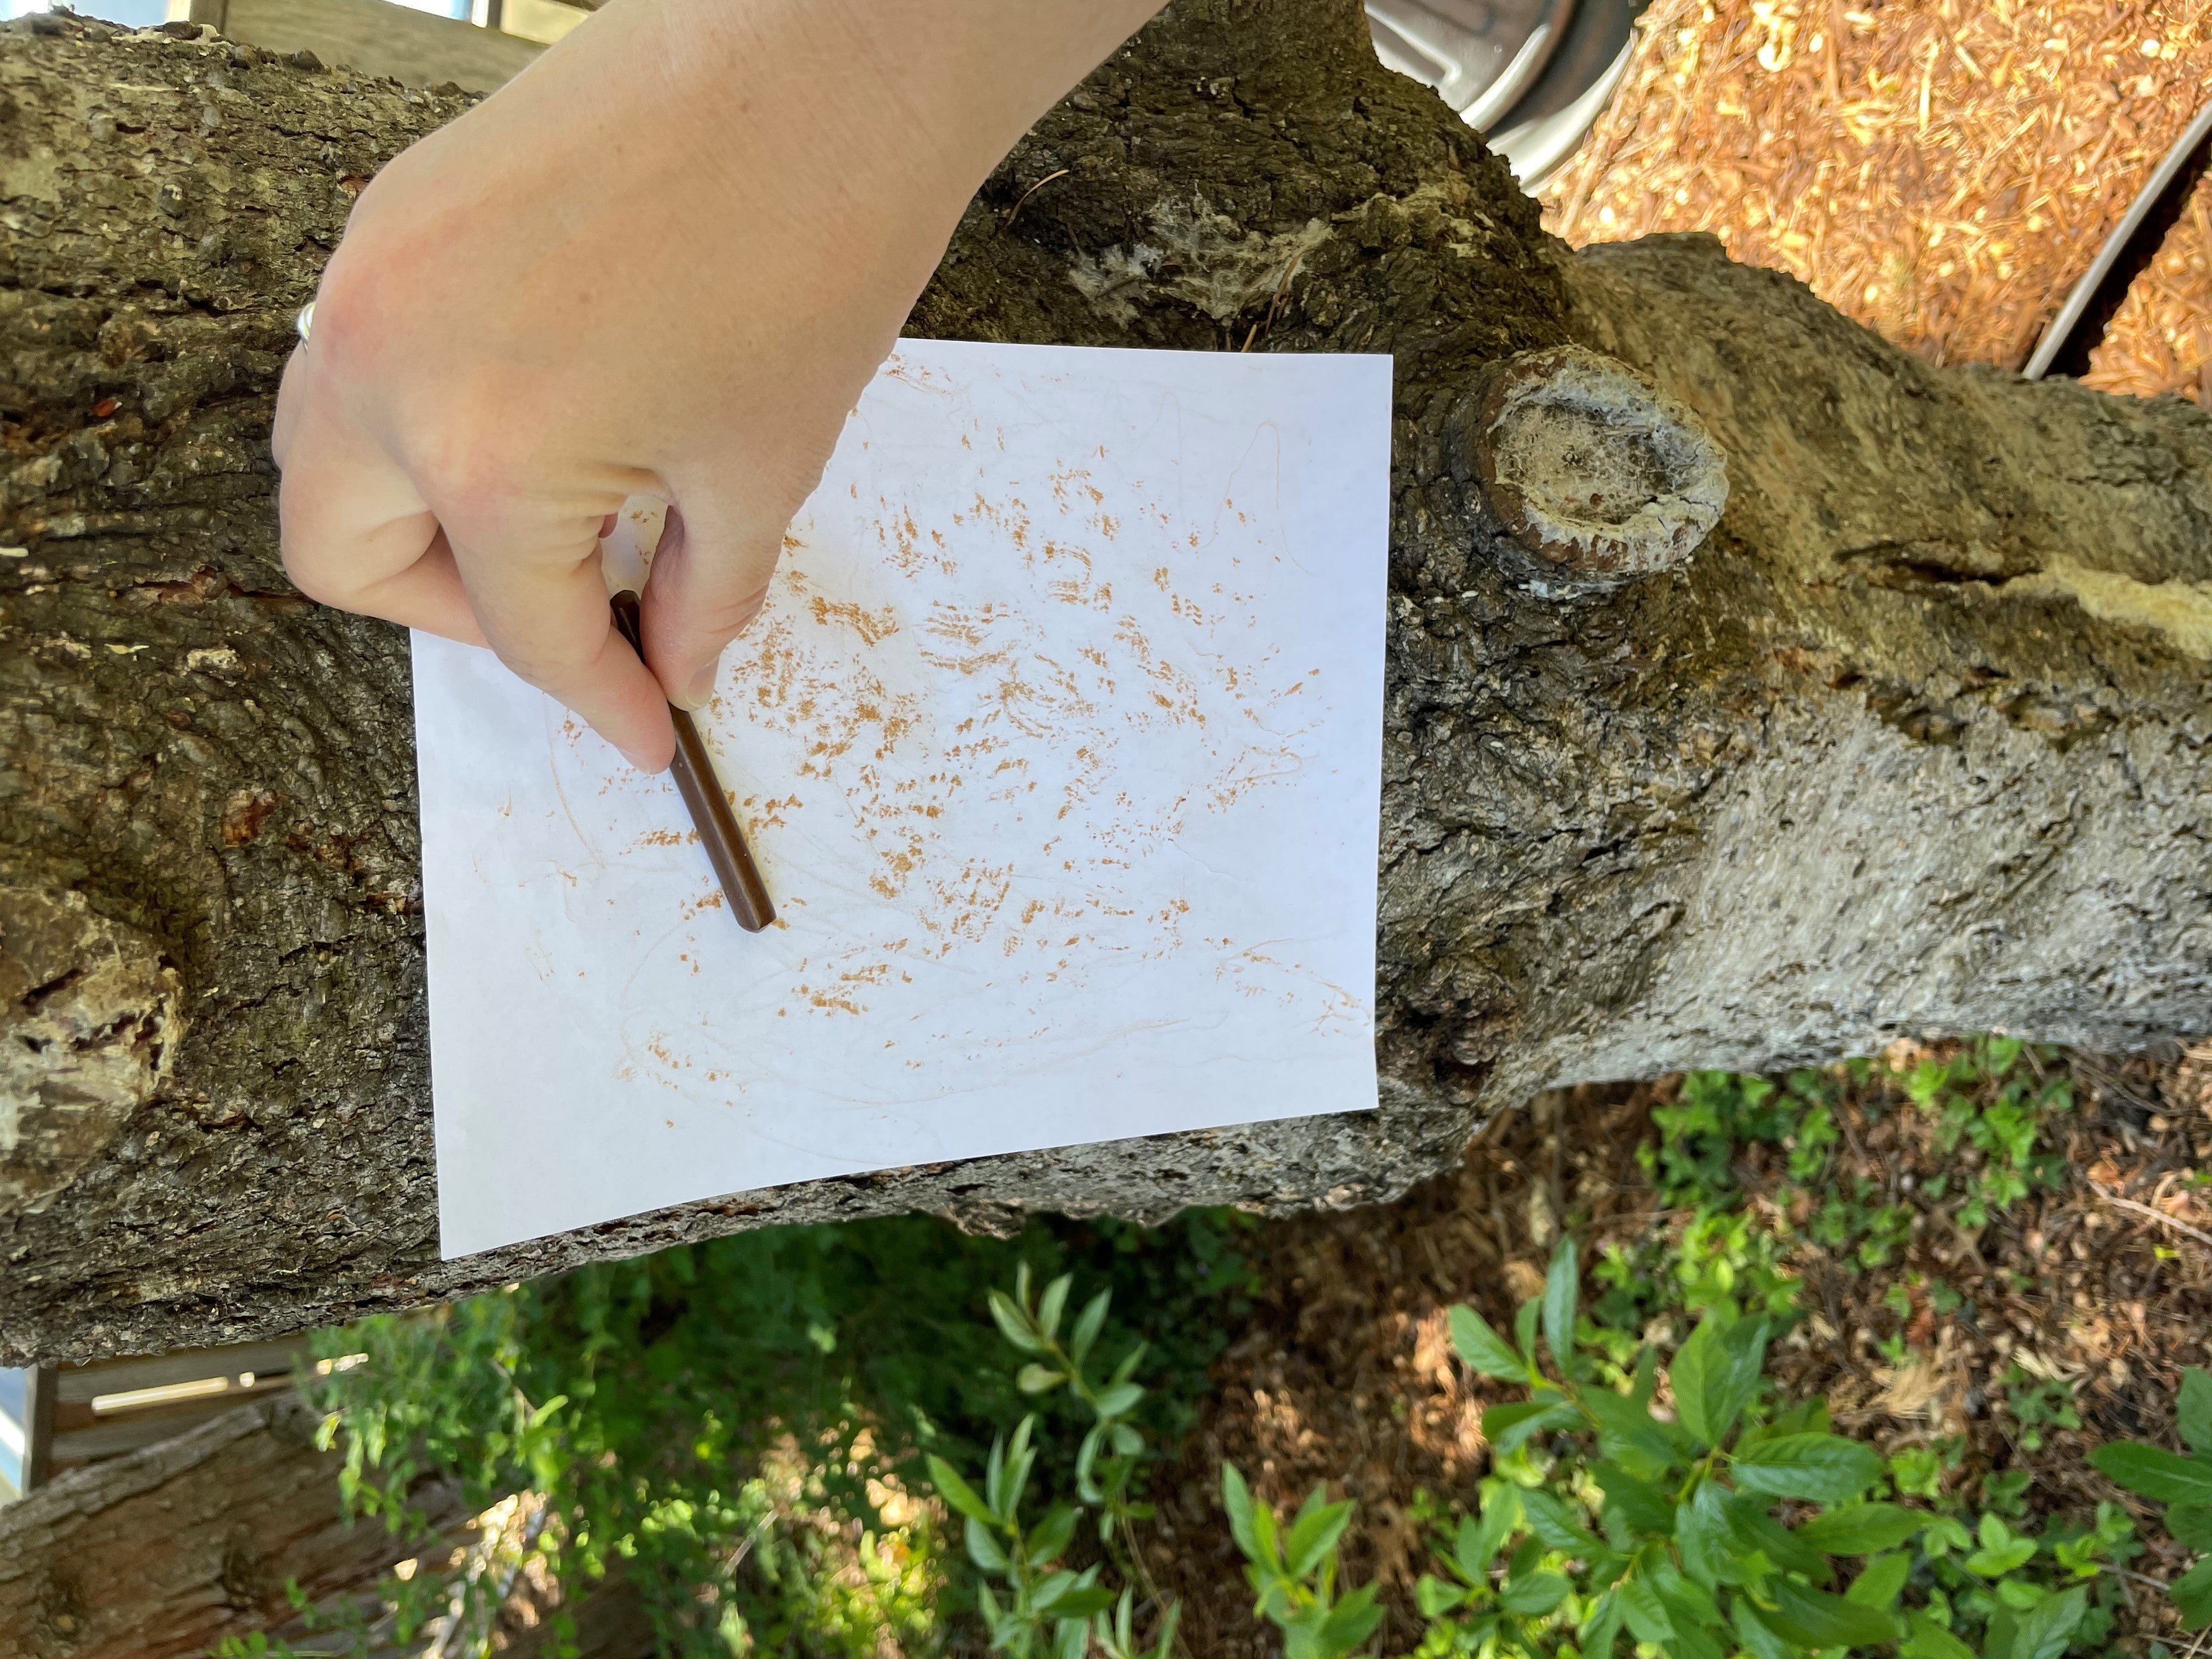 A person rubbing a crayon over paper that's being held against a tree